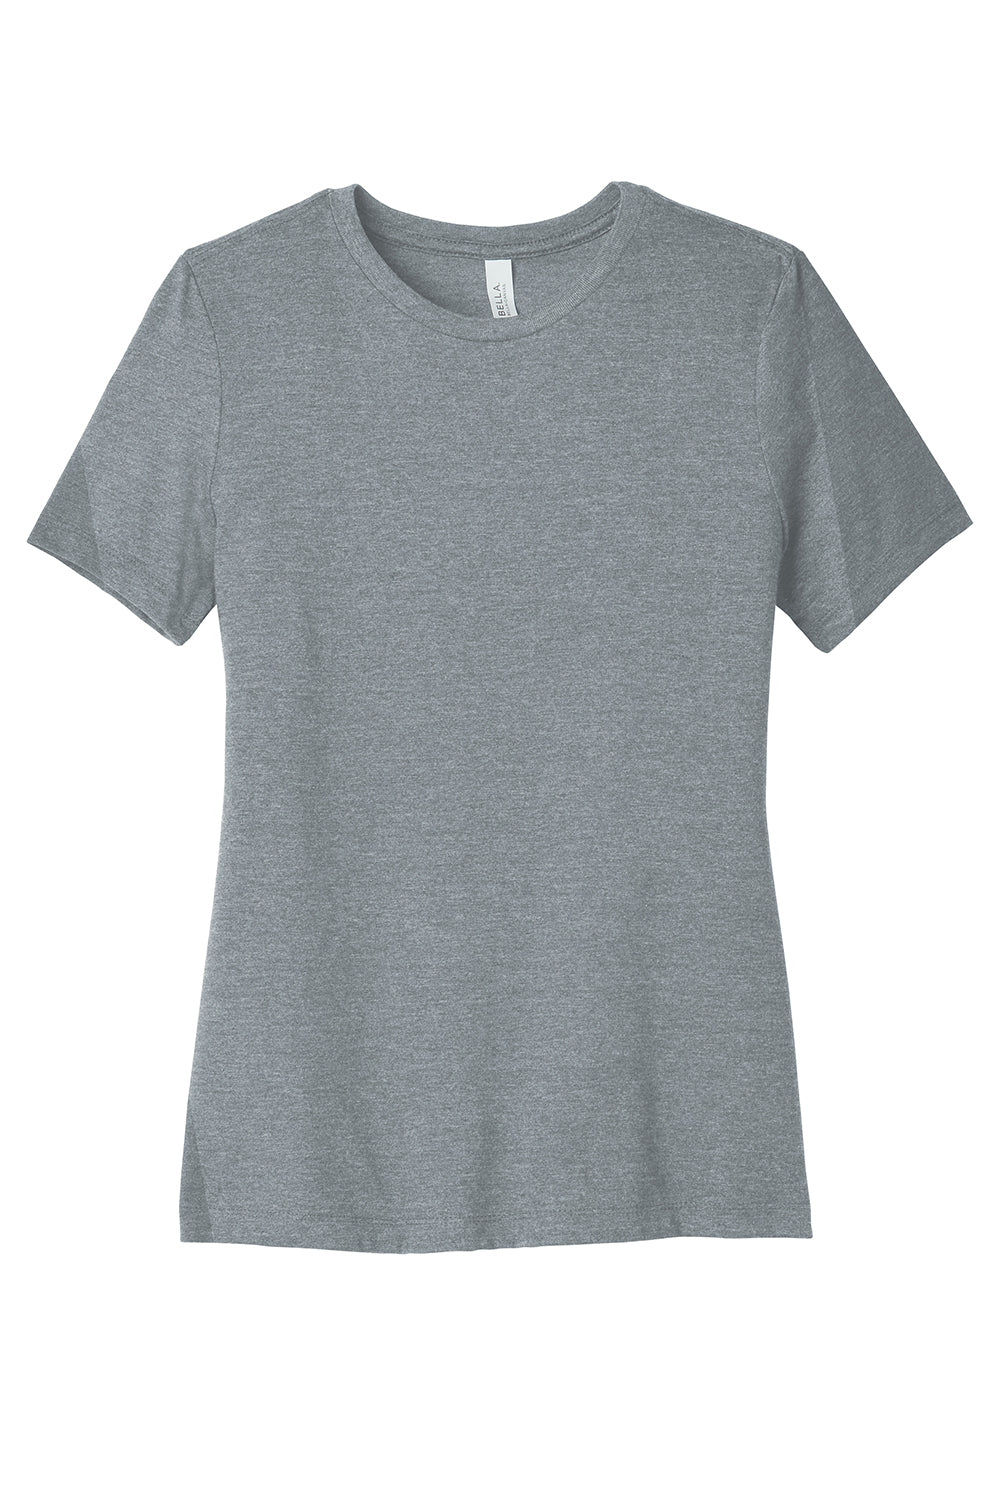 Bella + Canvas BC6400/B6400/6400 Womens Relaxed Jersey Short Sleeve Crewneck T-Shirt Athletic Grey Flat Front